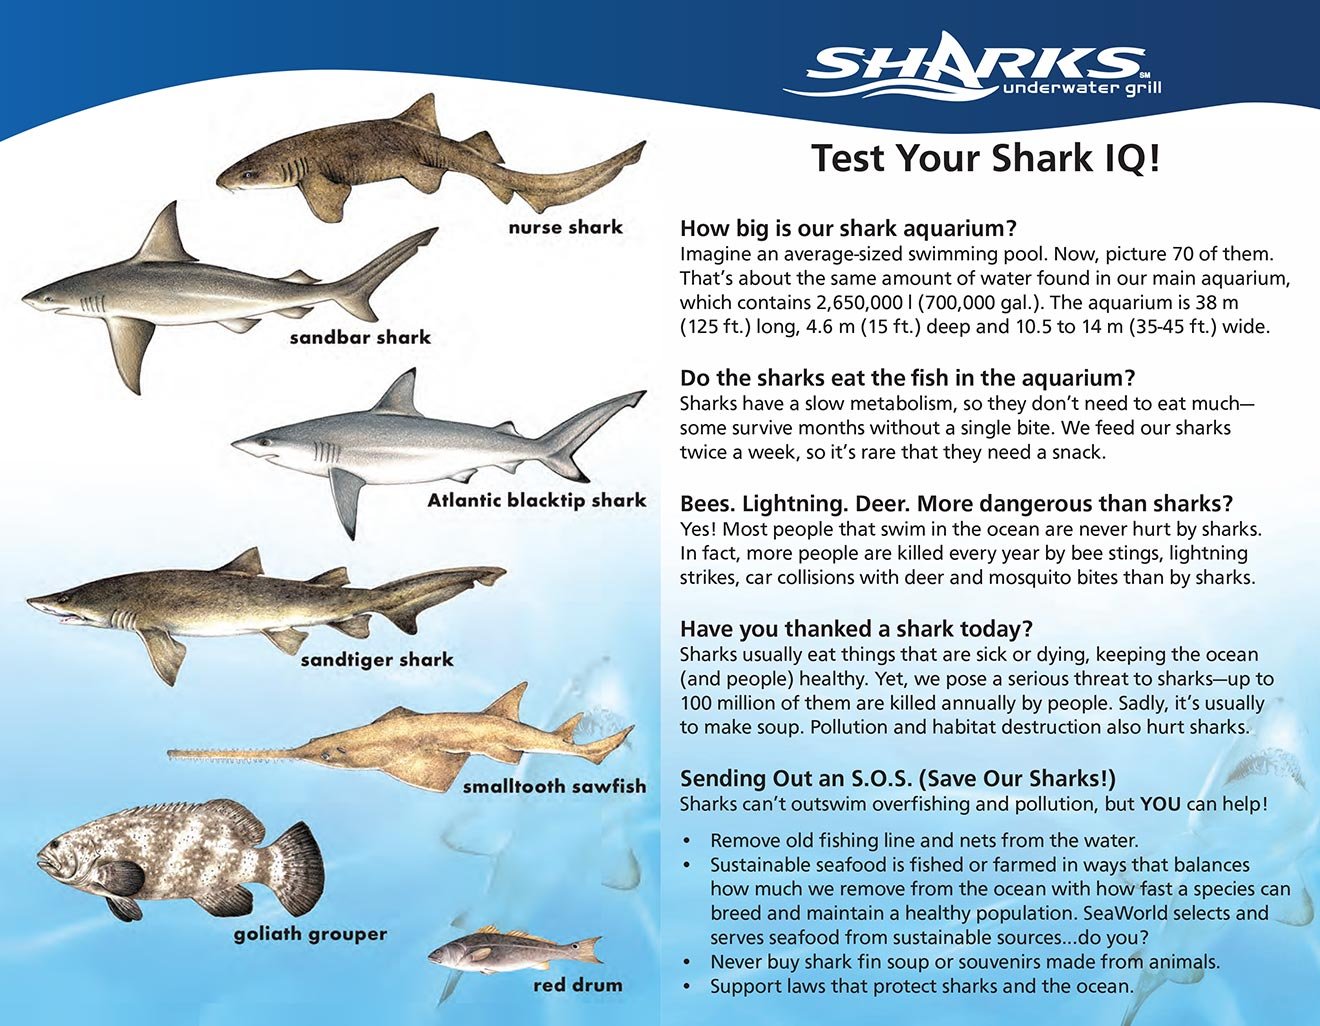 Test your Shark IQ while dining at Sharks Underwater Grill